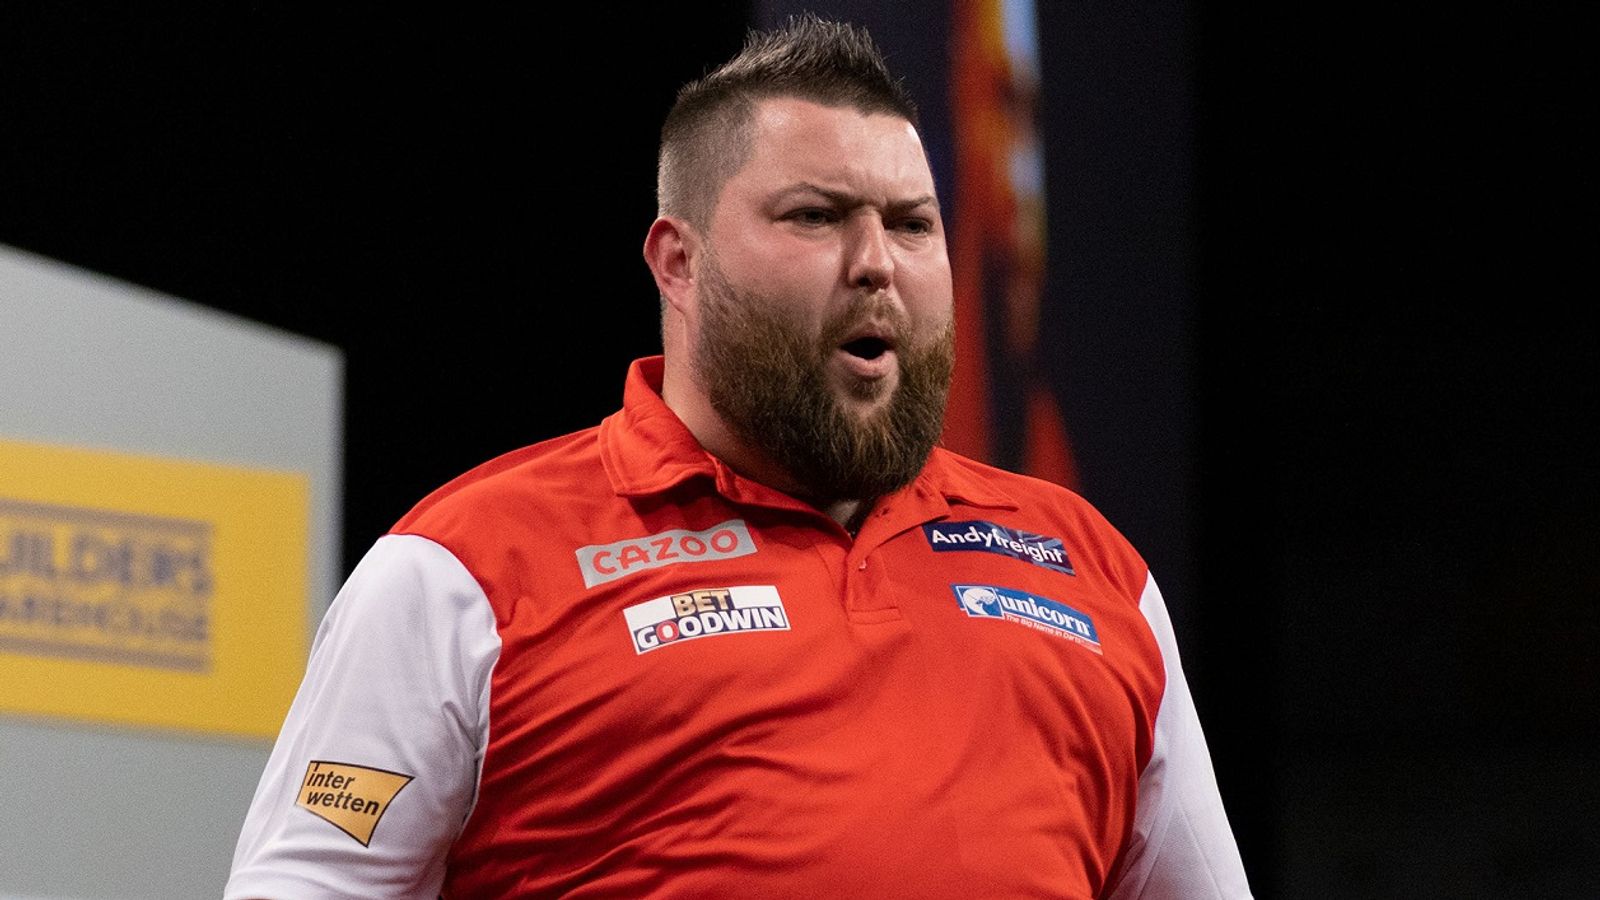 World Cup of Darts: England, Wales and defending champions Scotland all through to quarter-finals